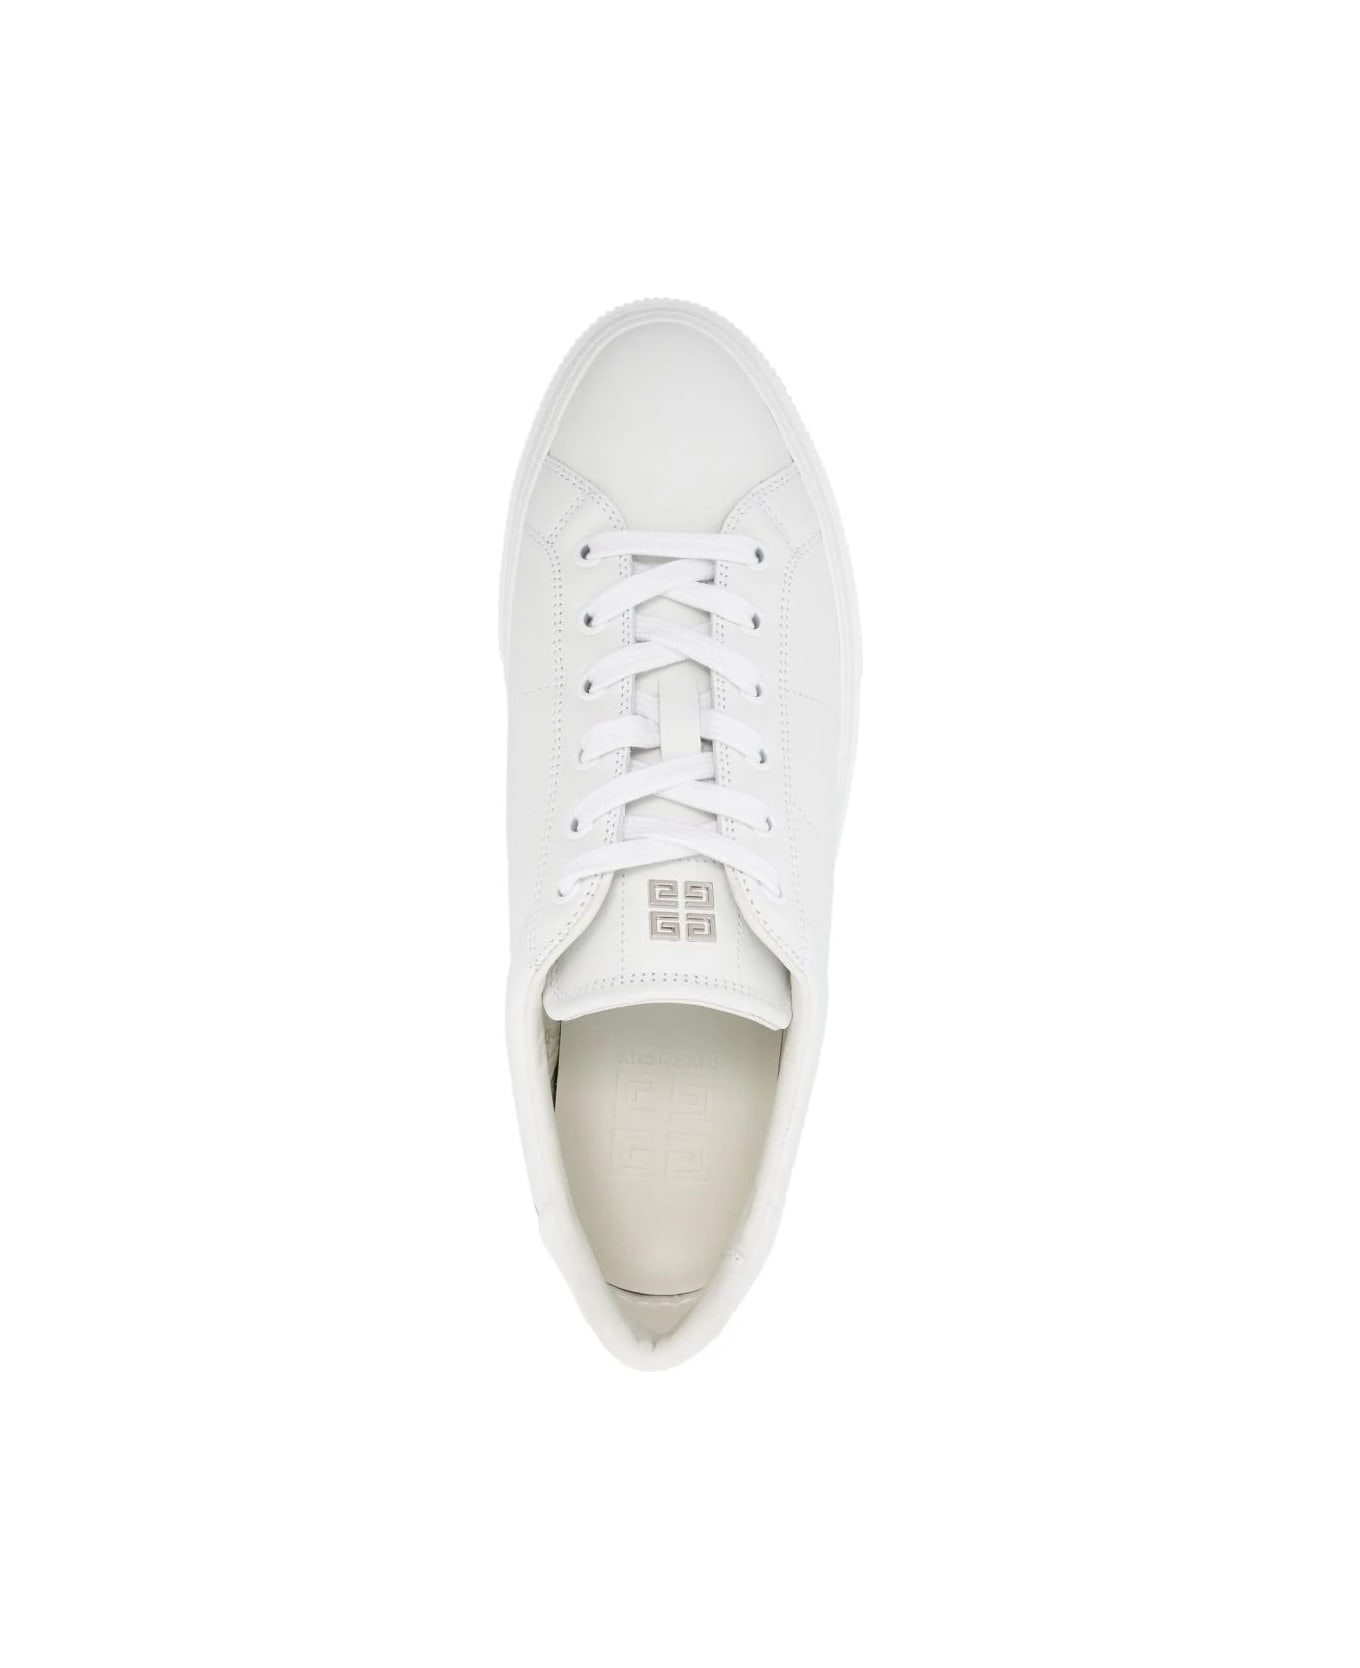 Givenchy Stone Grey City Sport Sneakers With Printed Logo - White